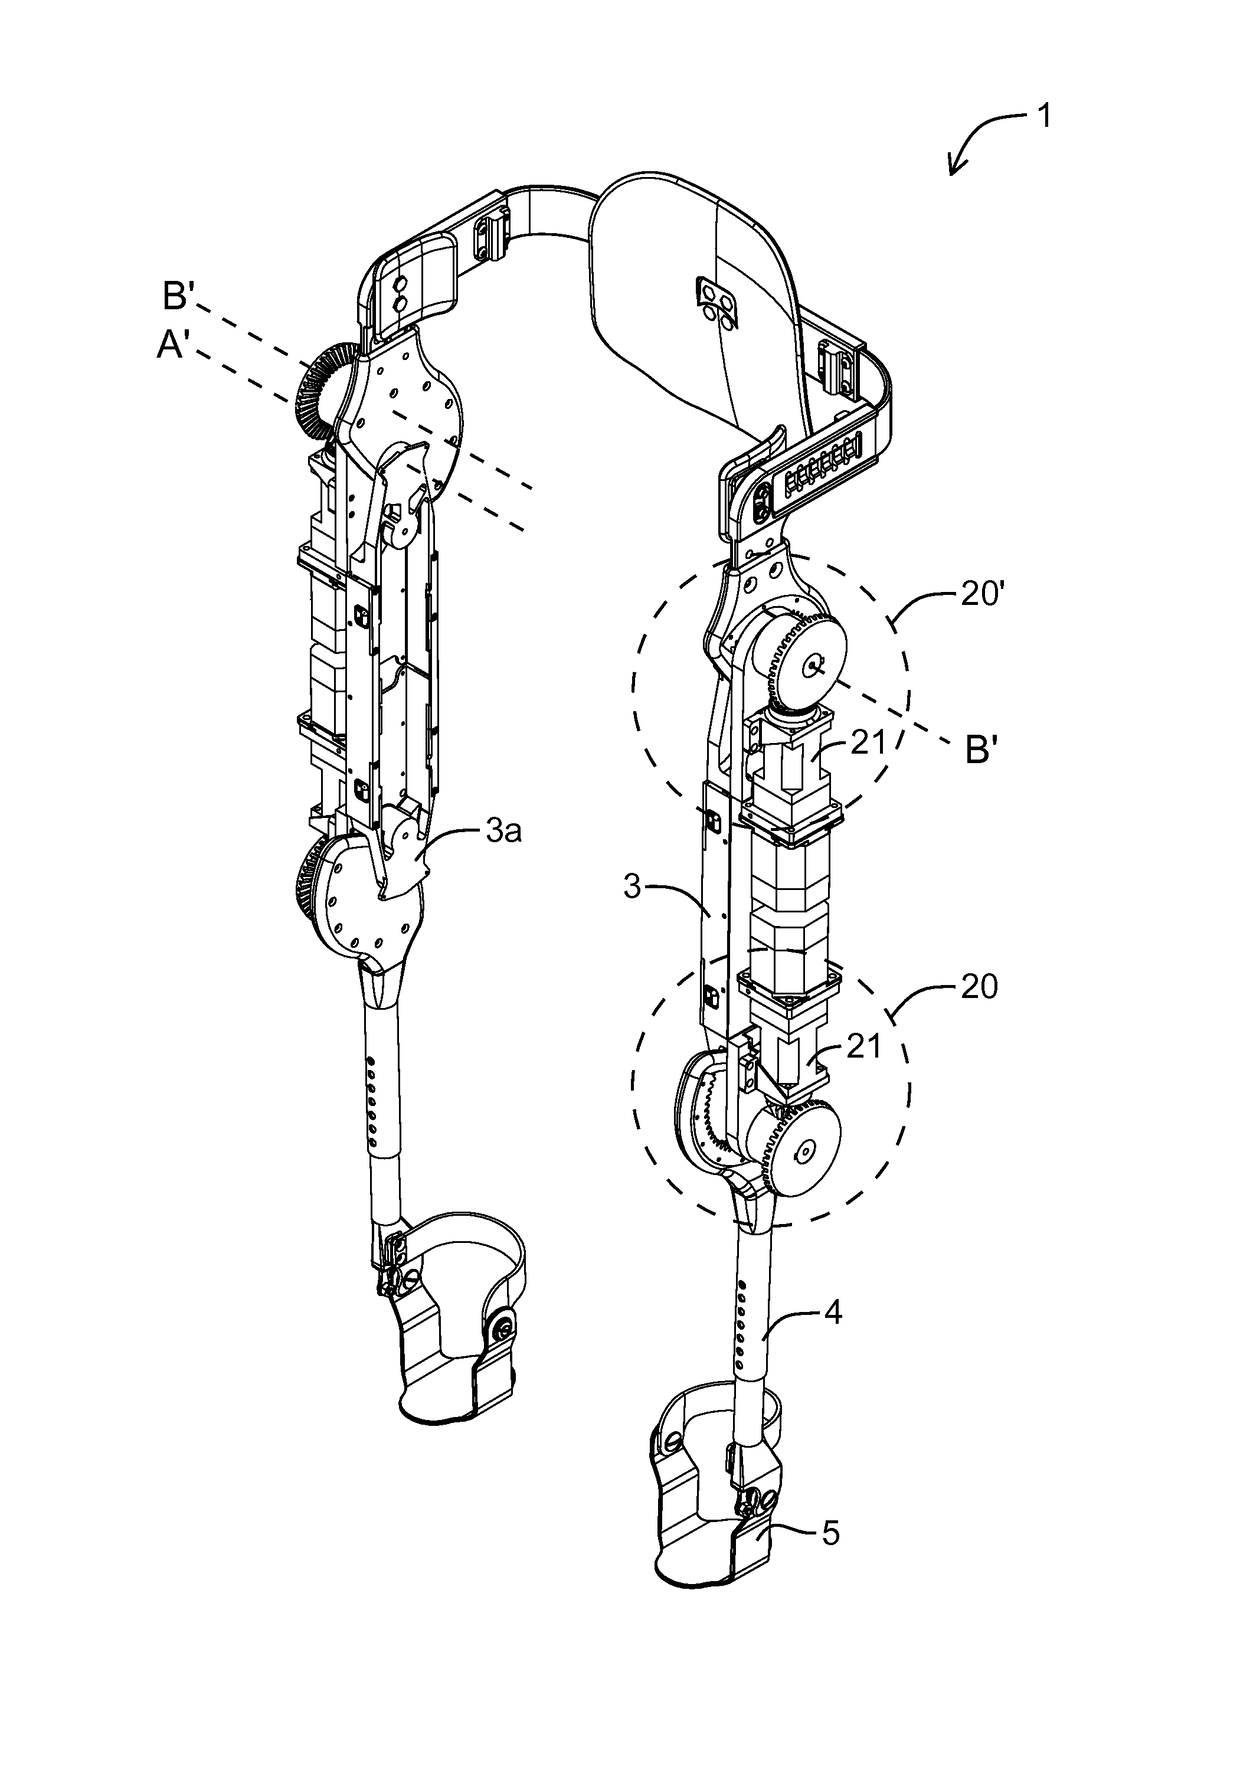 Transmission assembly for use in an exoskeleton apparatus